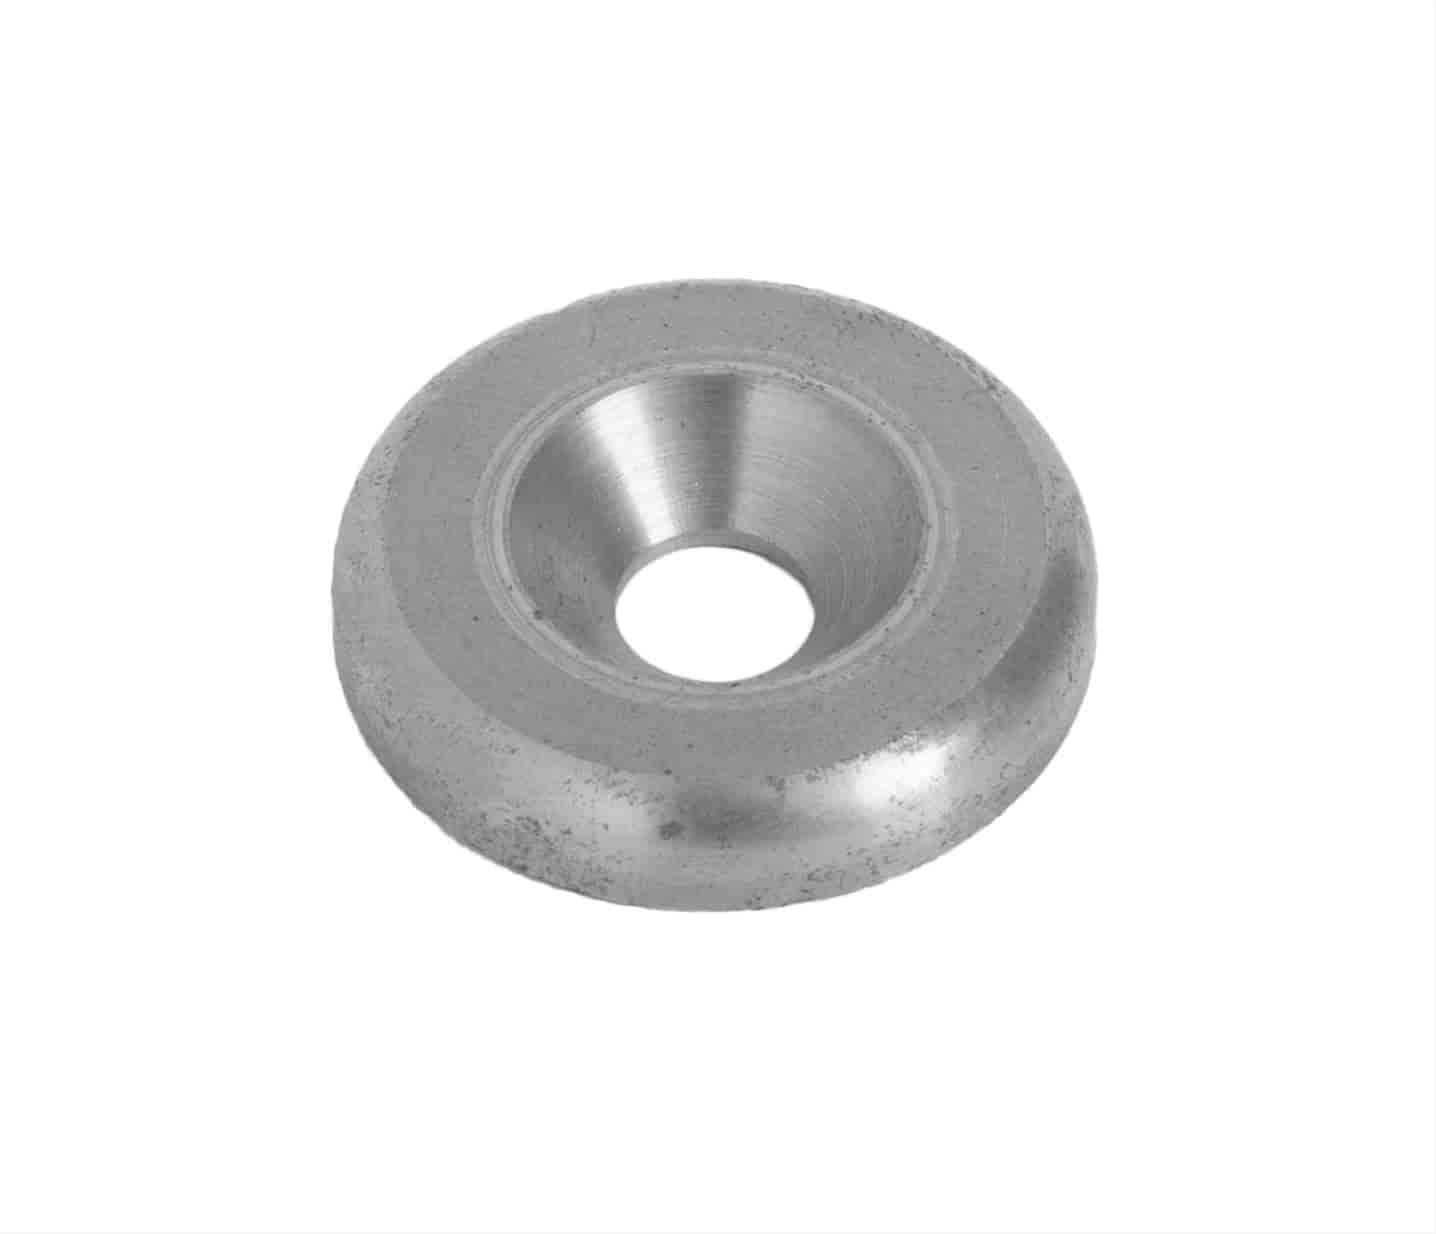 A-Arm Shaft Retaining Washer